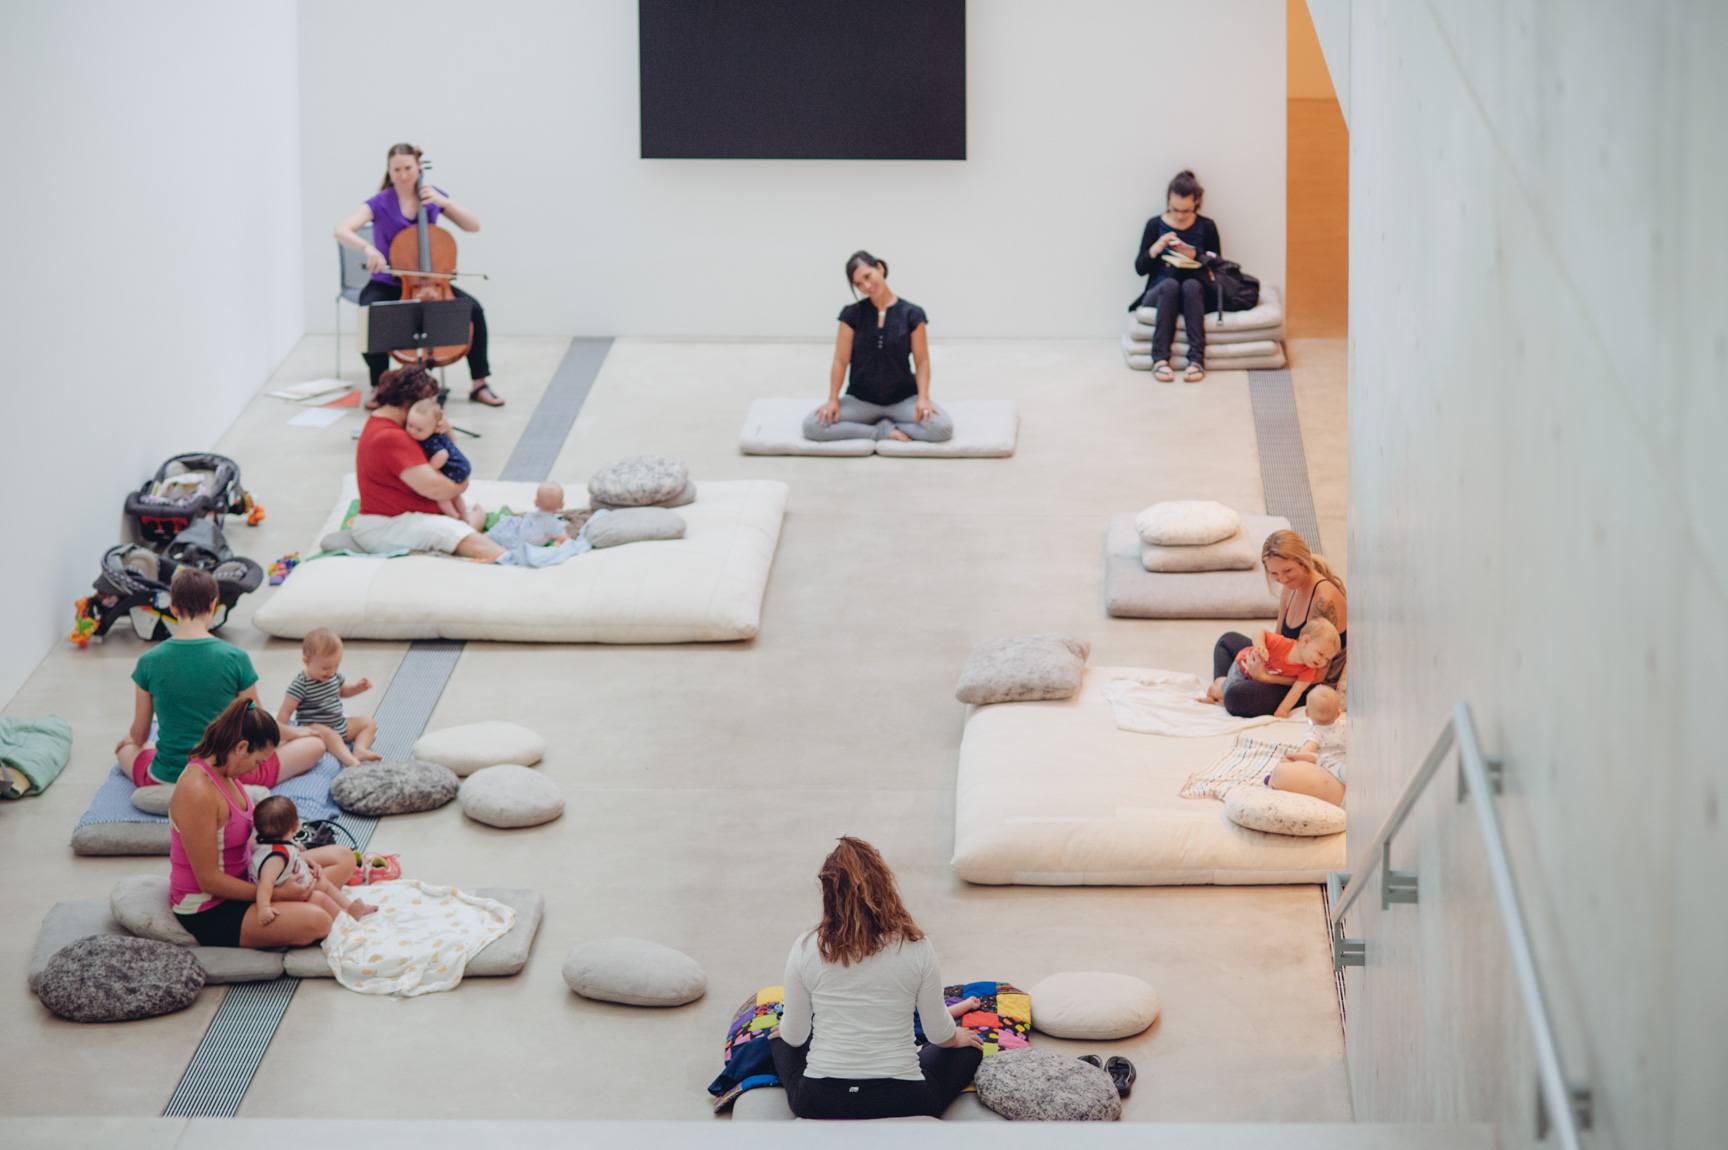 Visitors and their infants participate in an exercise on cushions in the Lower-Main Gallery, while a cellist plays in the corner.